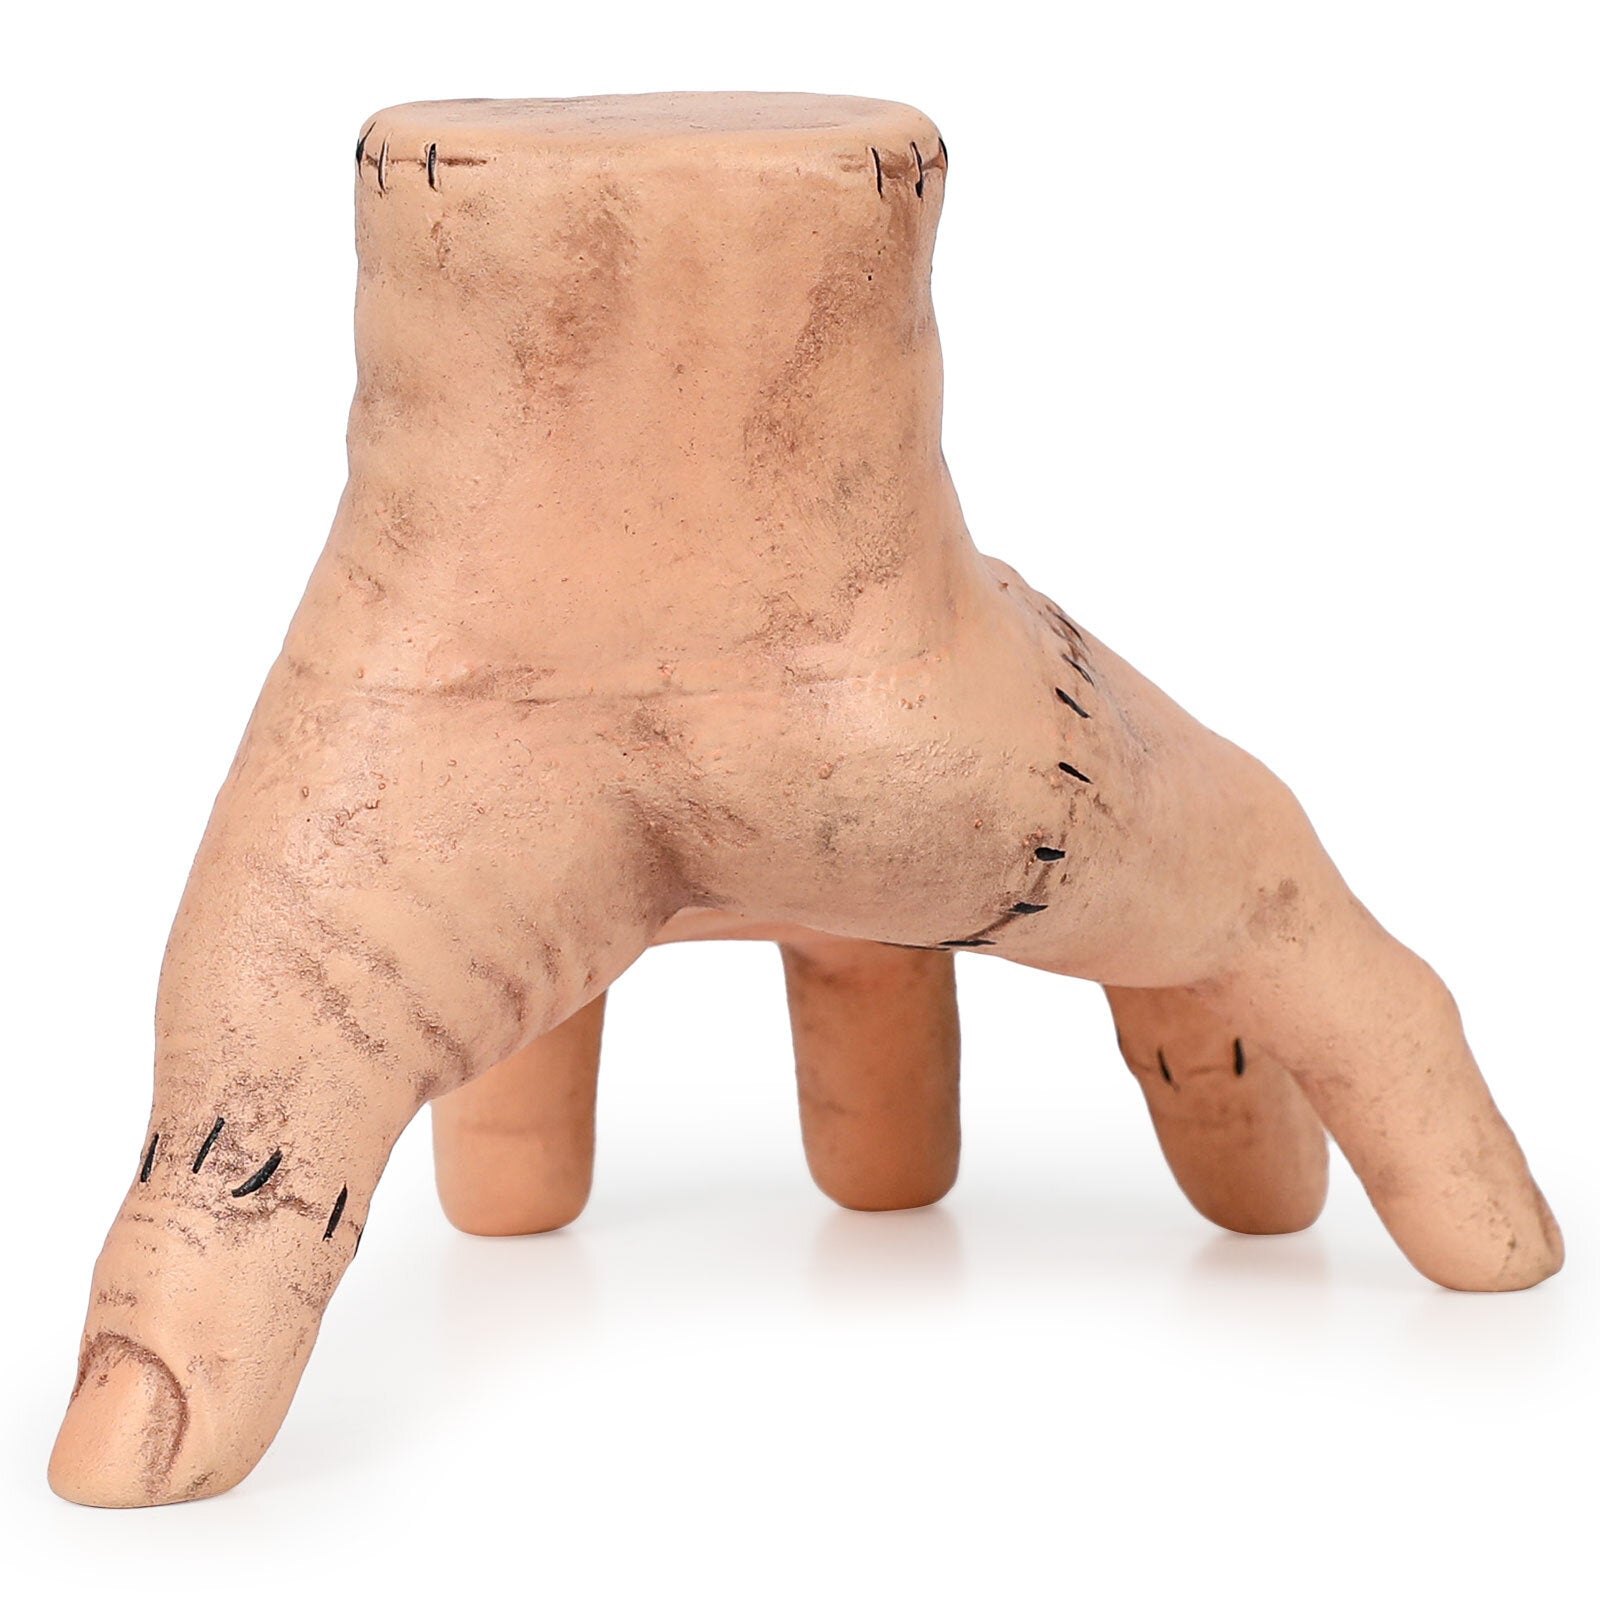 Addams Family Thing Hand Prop Toy